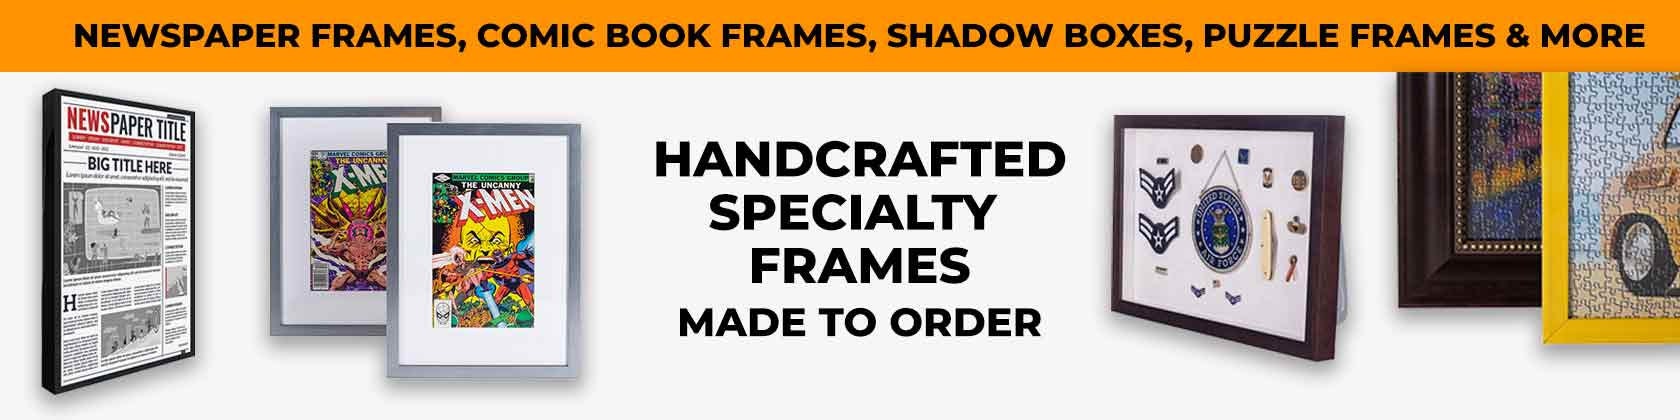 CustomPictureFrames 12x12 Modern Black Wood Picture Frame - with Acrylic Front and Foam Board Backing